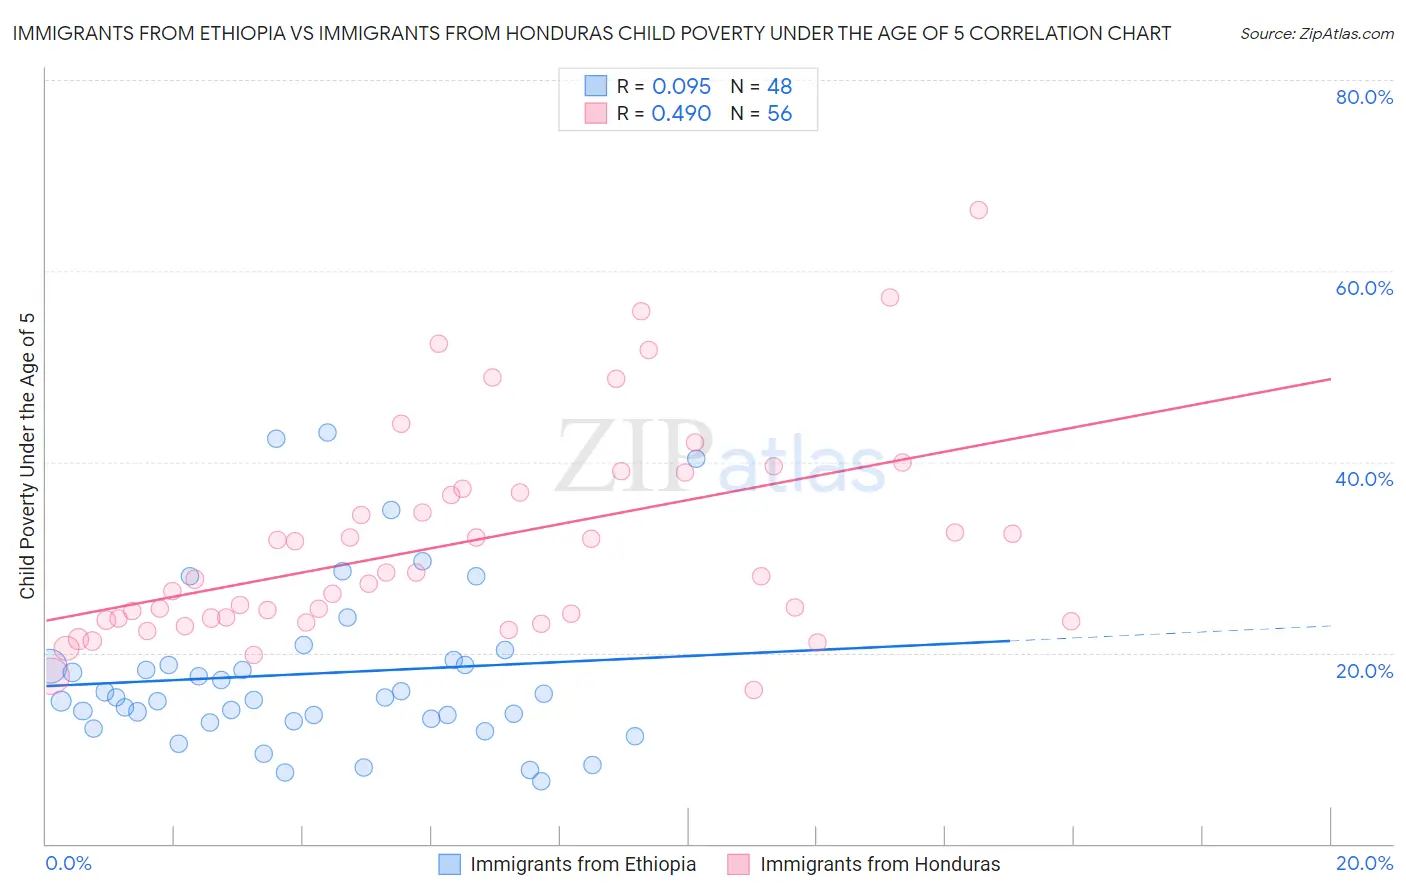 Immigrants from Ethiopia vs Immigrants from Honduras Child Poverty Under the Age of 5